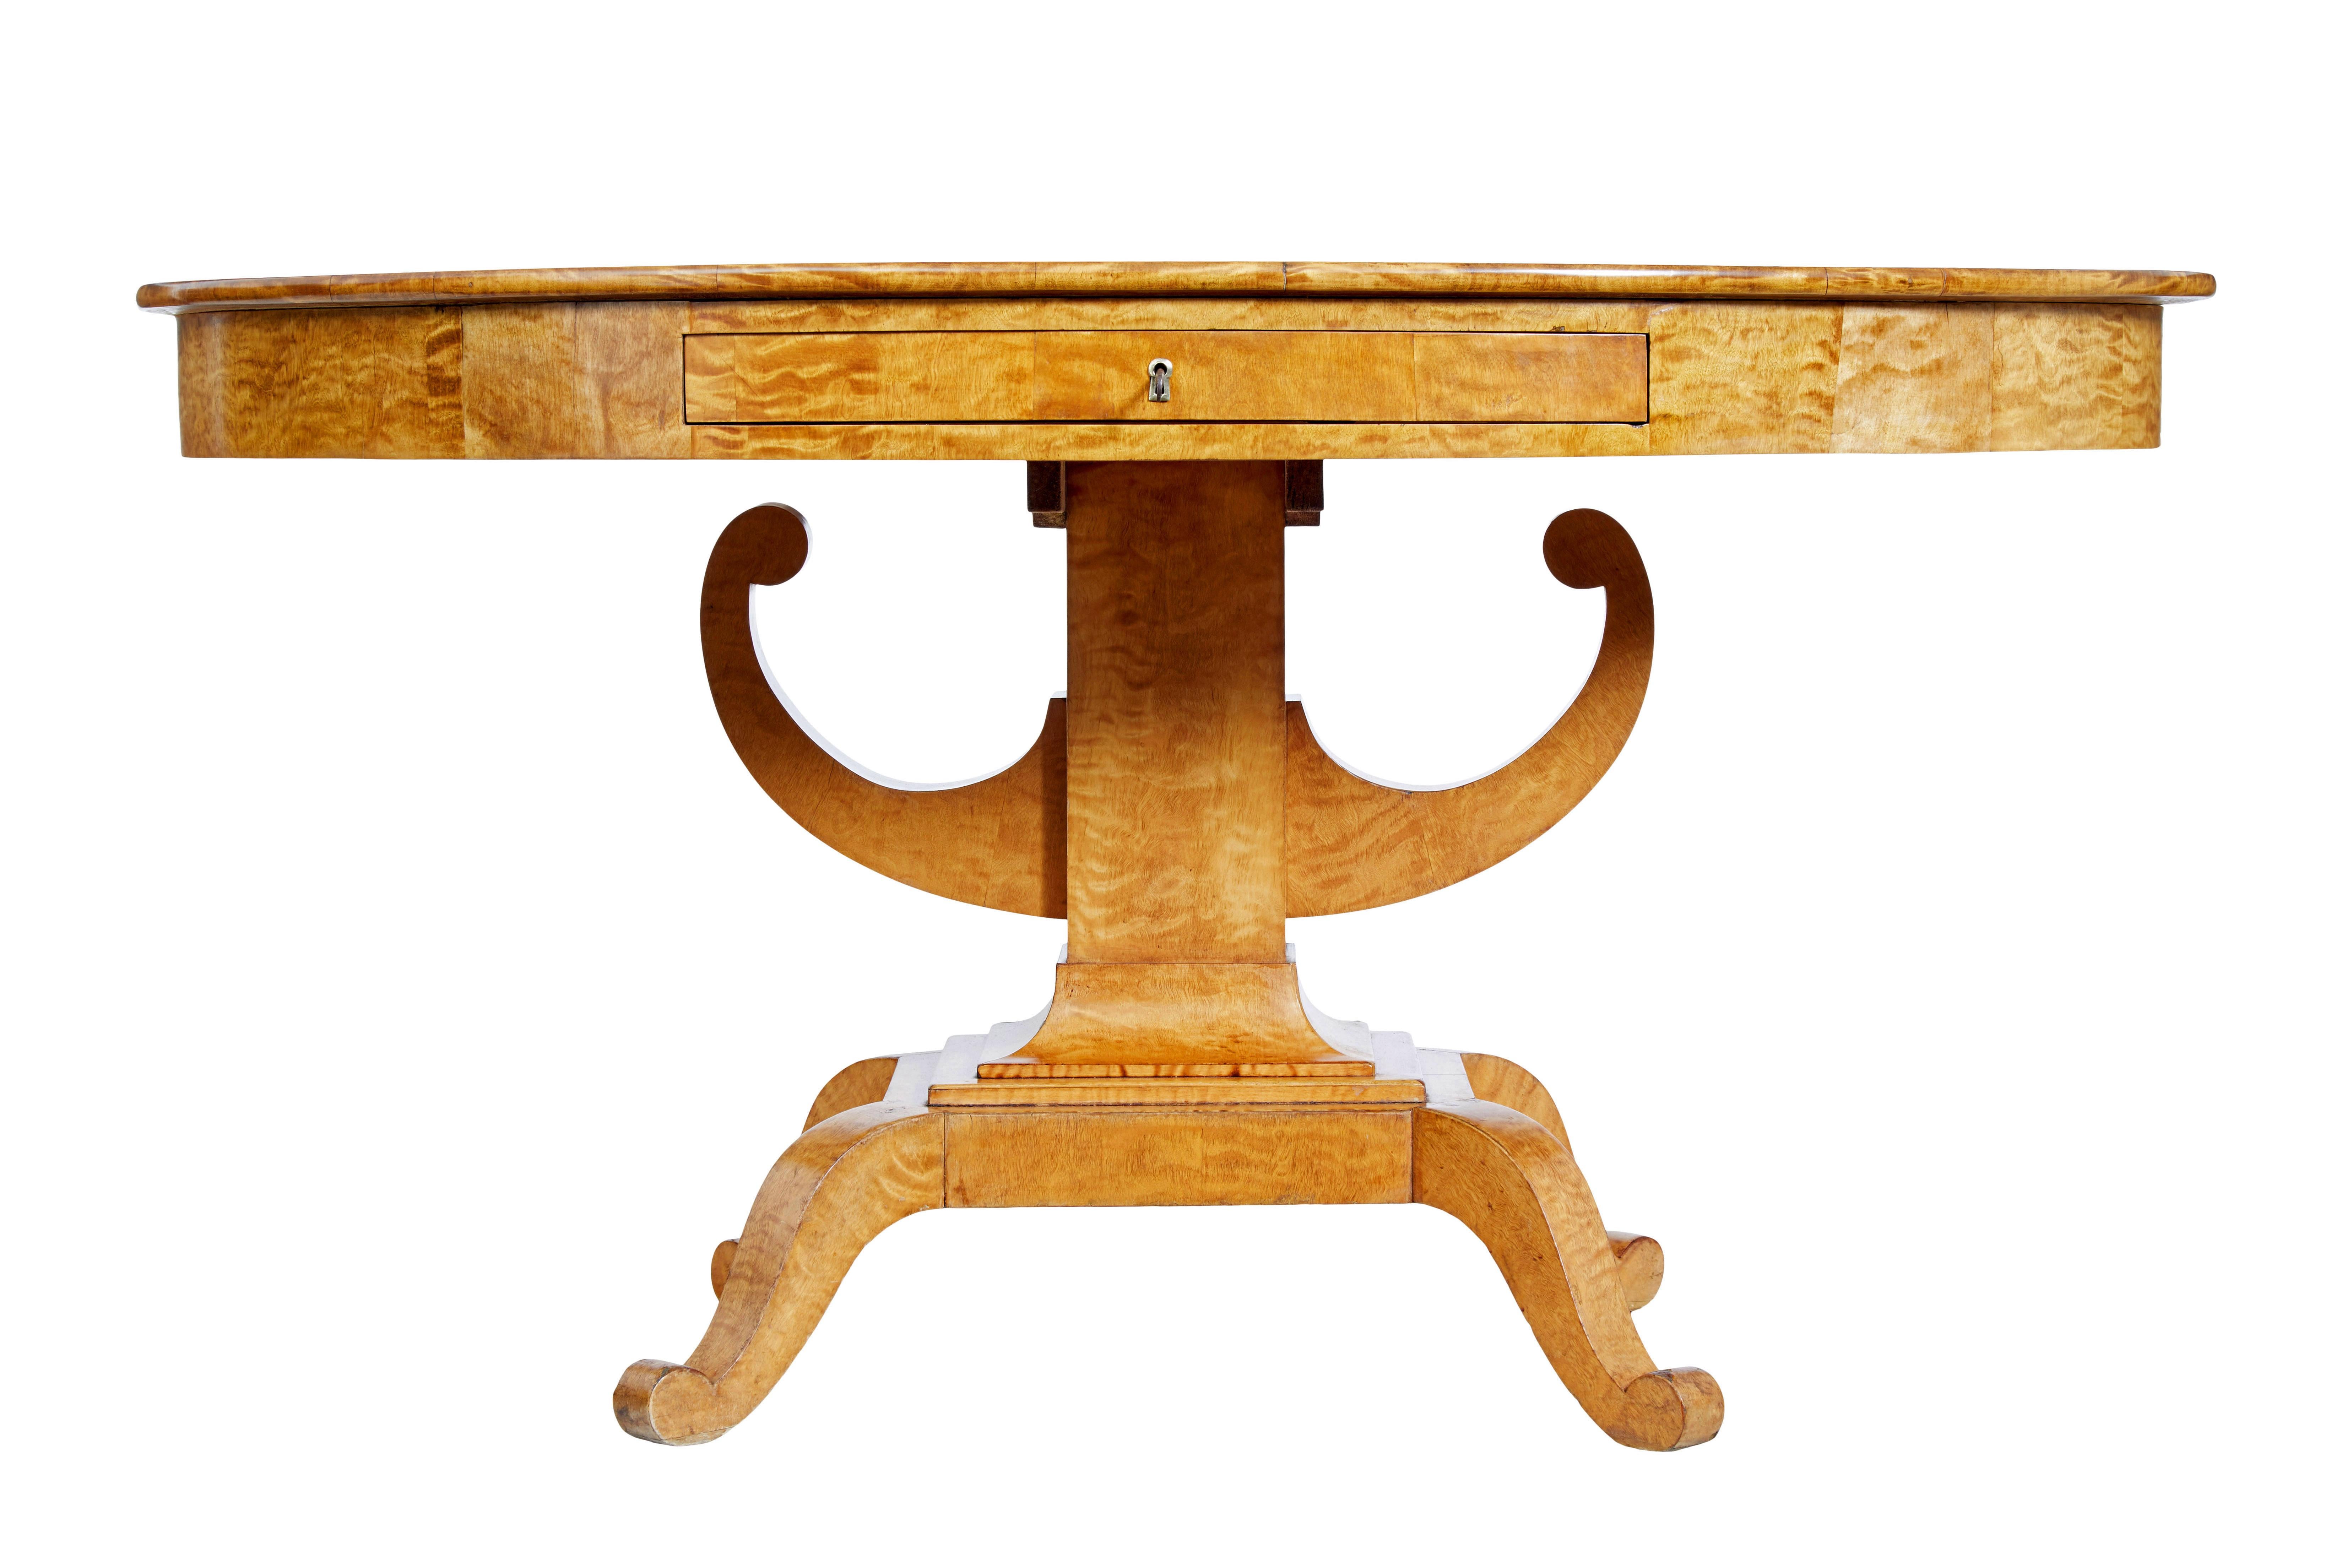 Oval 19th century birch empire center table circa 1860

Beautiful swedish birch center table.  Oval top surface with matched birch veneers and striking grain.  Deep freize with single drawer to the front.  Supported by a block base and scroll